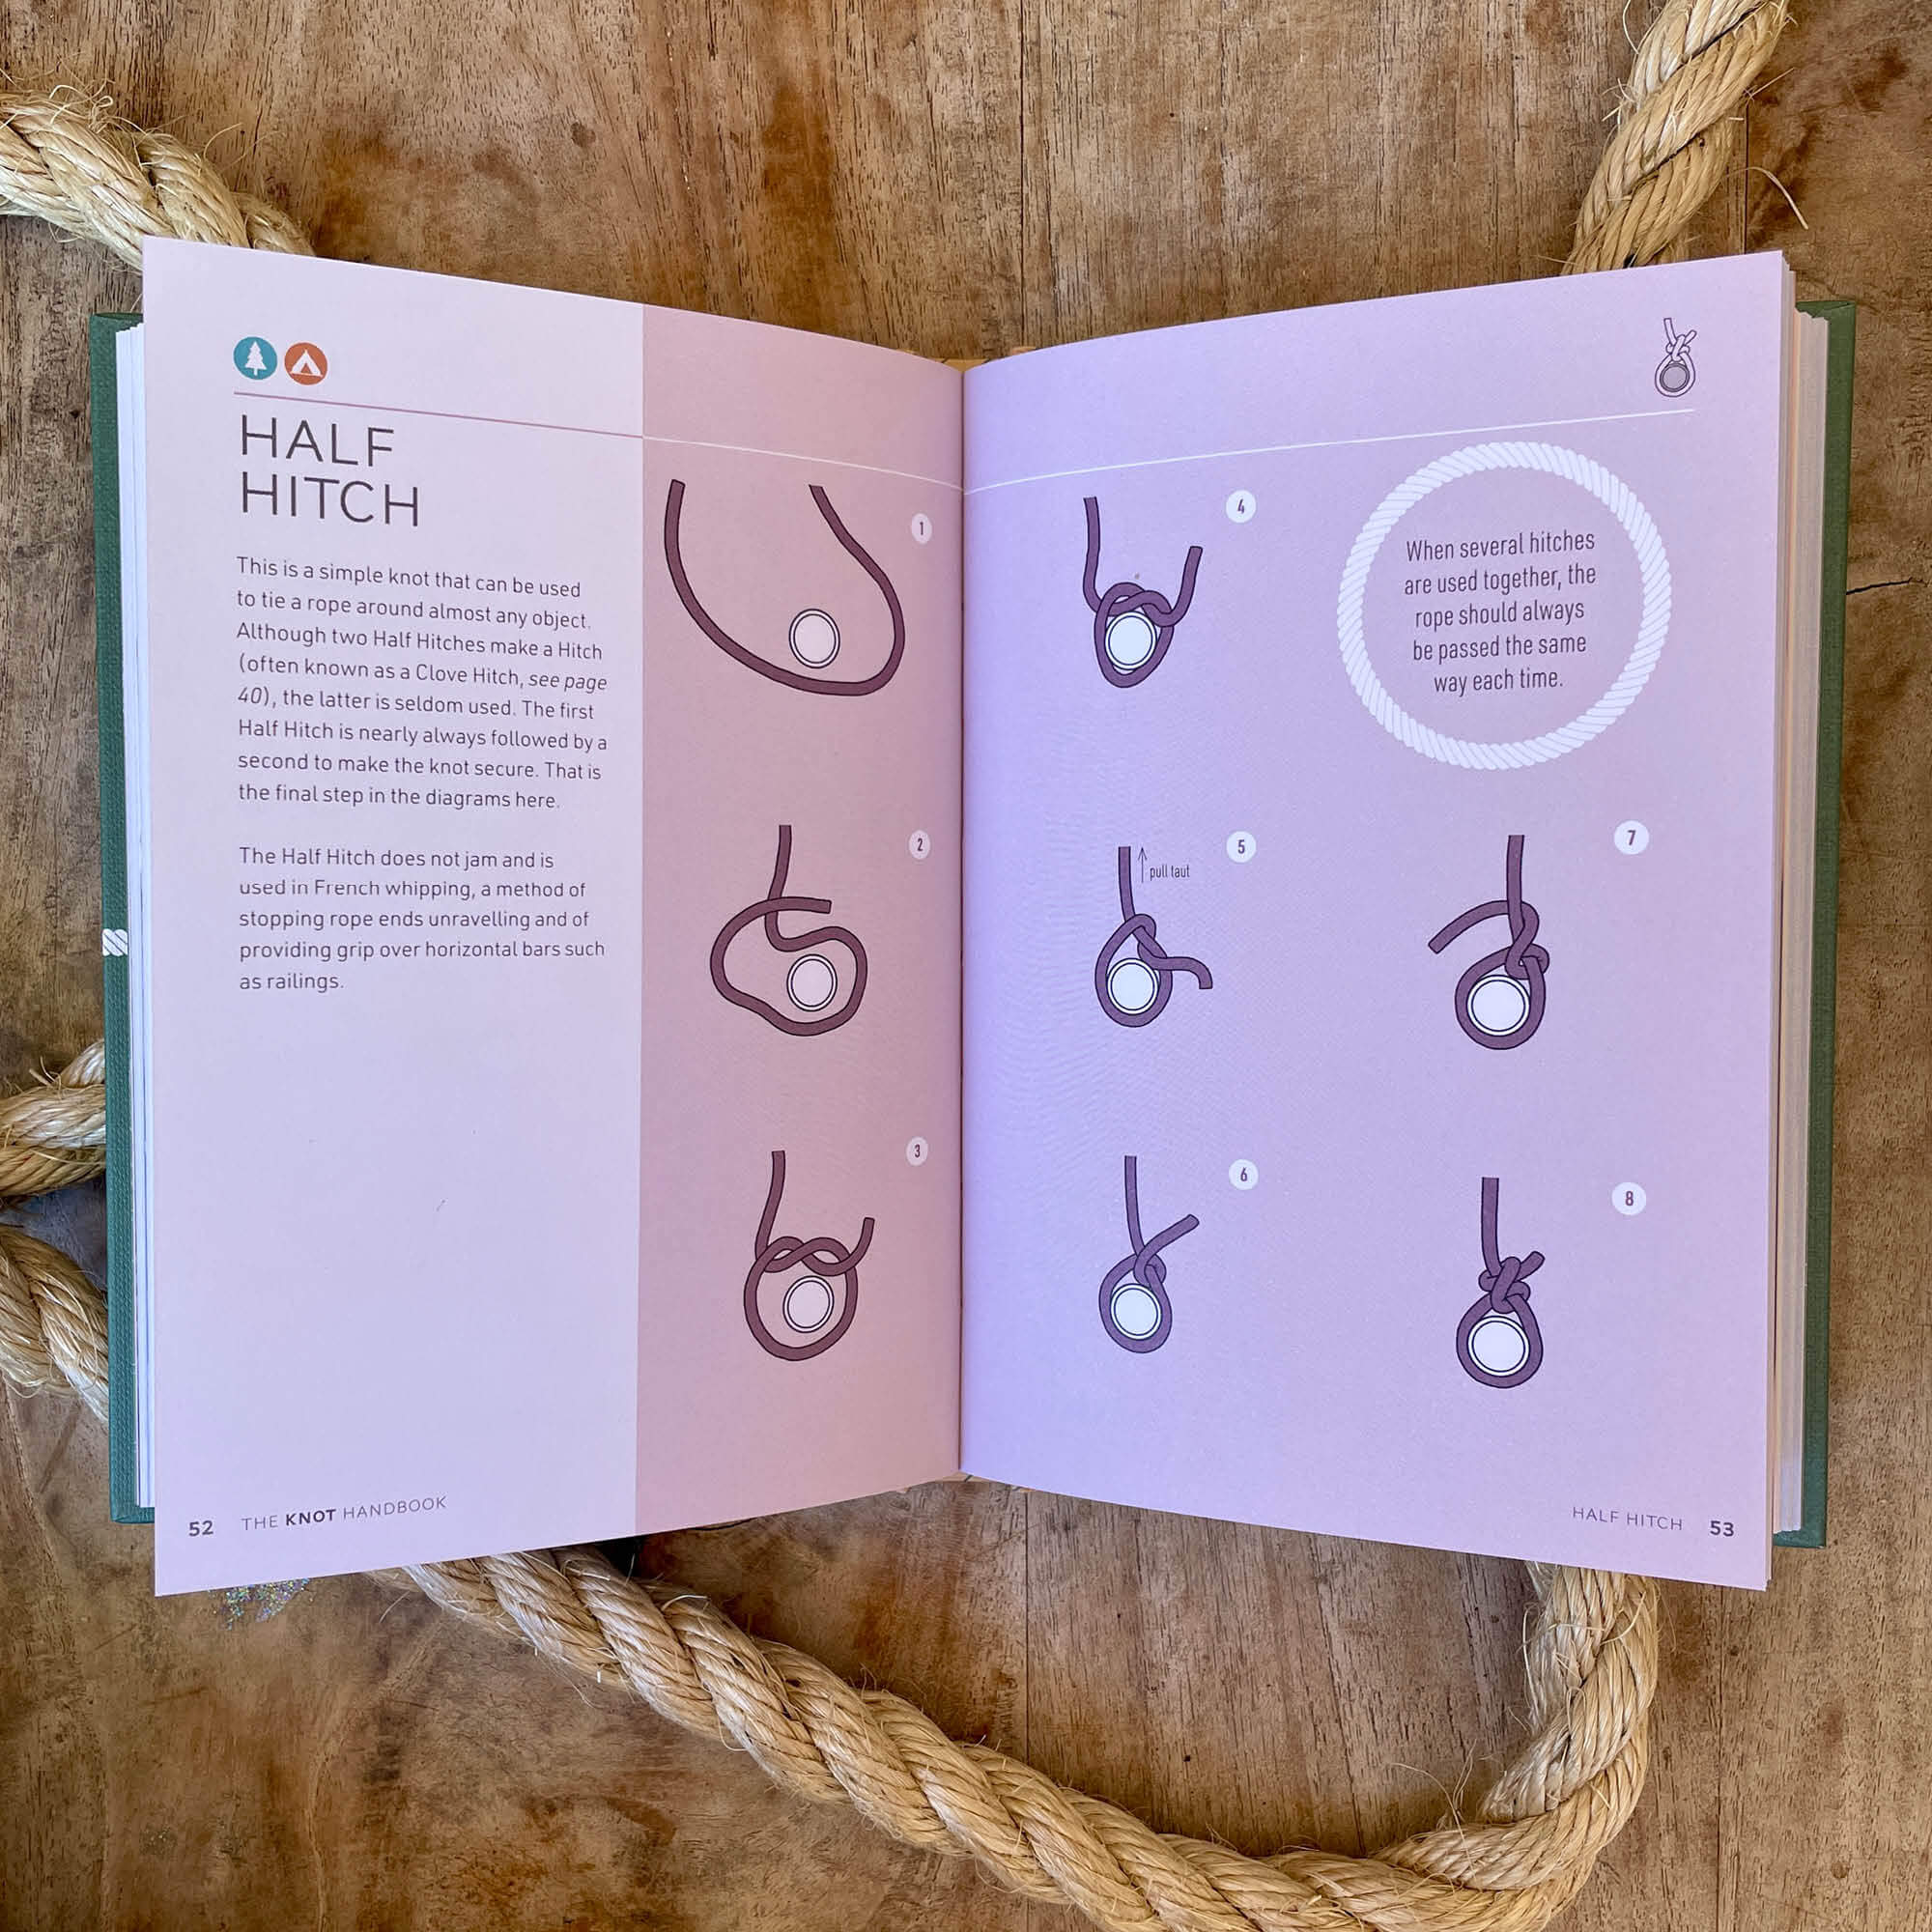 Popular knot example from The Knot Handbook by George Lewis, 50 essential knots and their uses, part of the nature inspired range at Your Wild Books 